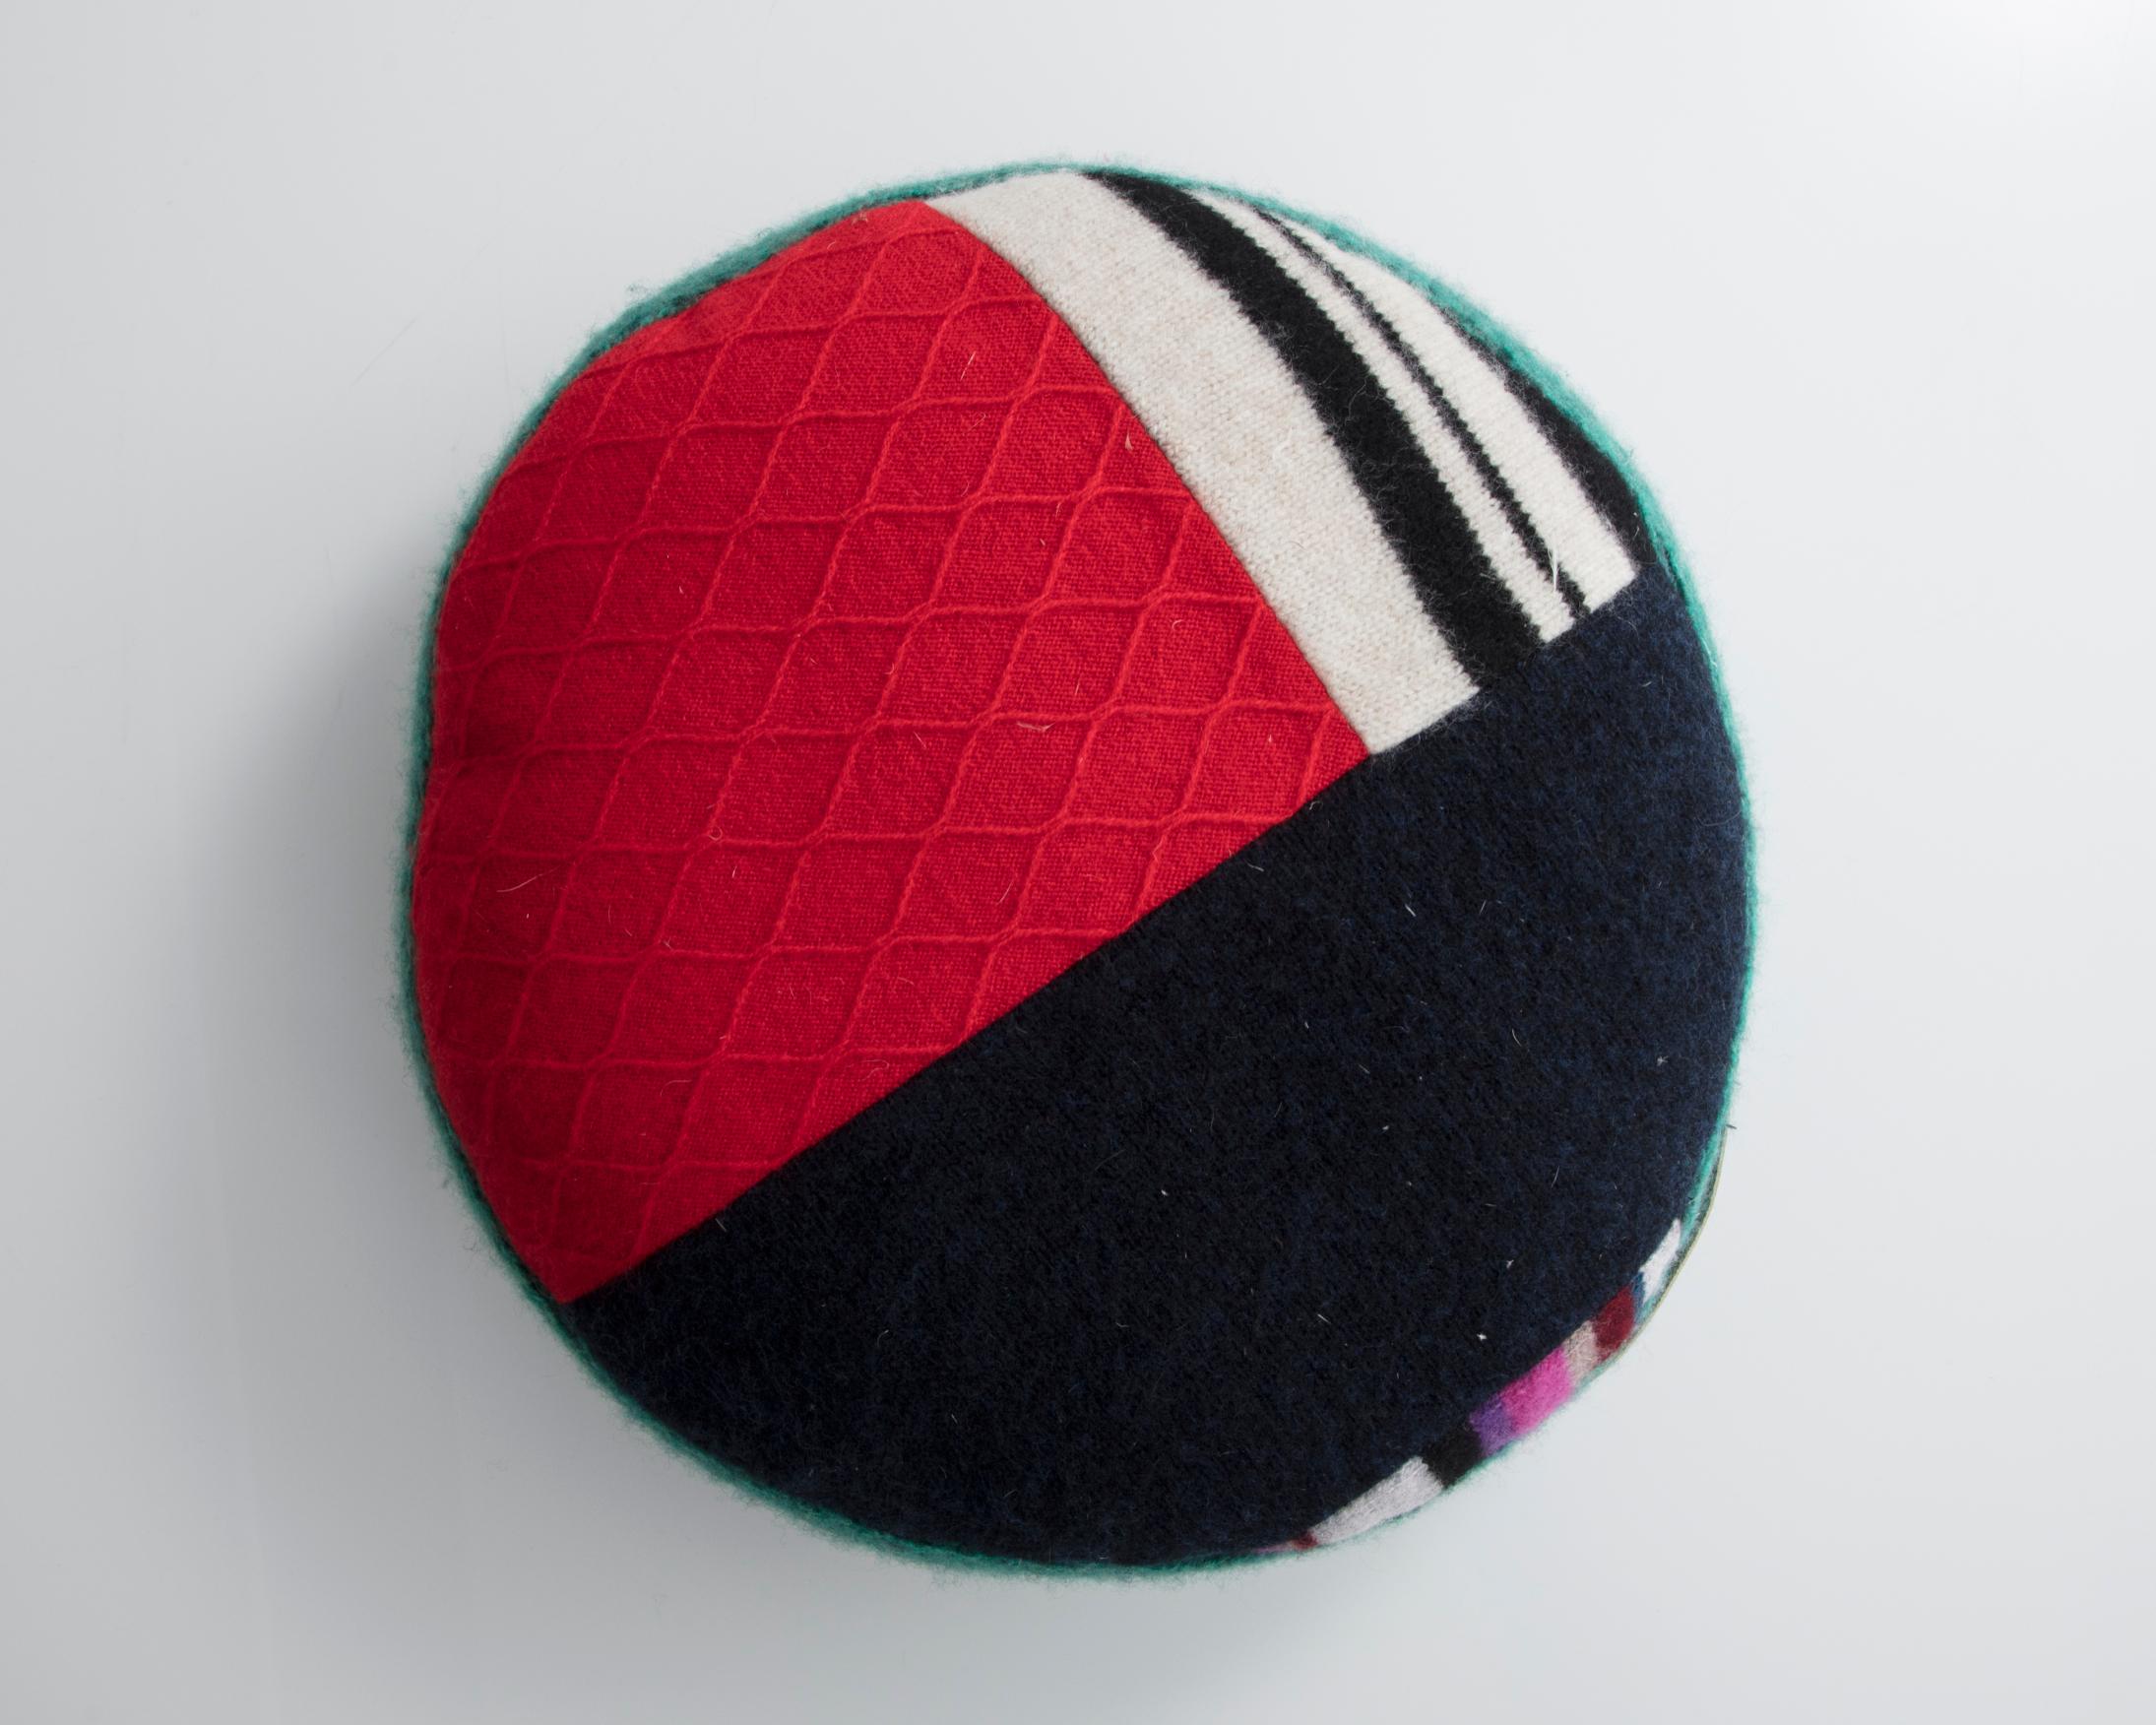 Unique round pillow in multi-colored cashmere. Designed and made by Greg Chait, USA, 2016.